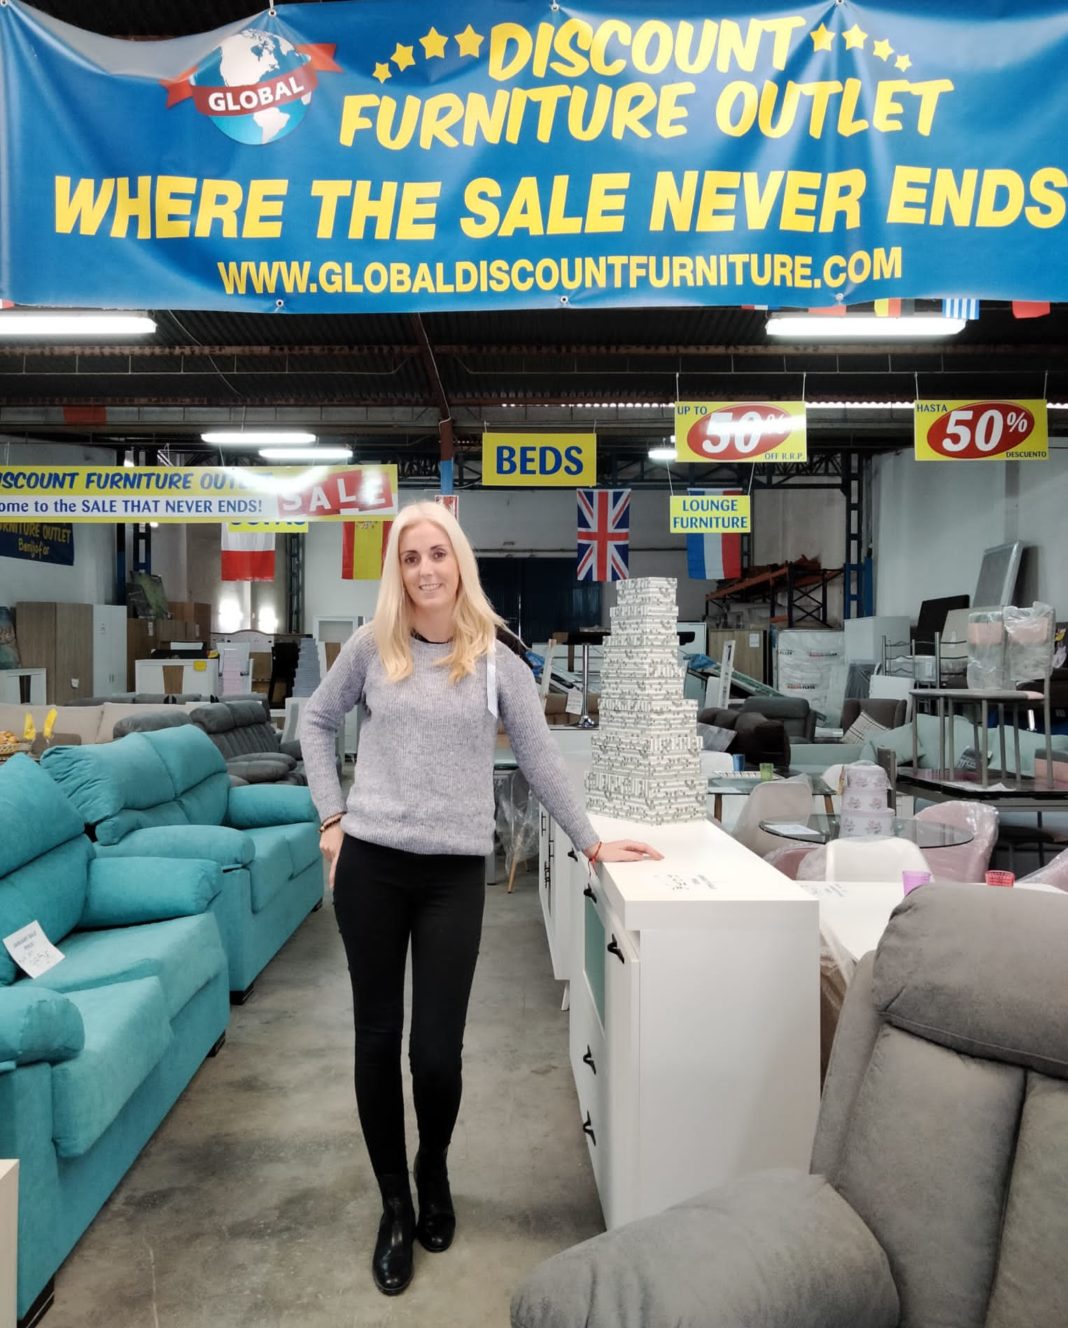 Benijofar based Global Discount Furniture Outlet proprietor Hayley featured in the C5 TV documentary 'Bargain Loving Brits In The Sun' showcasing the business.